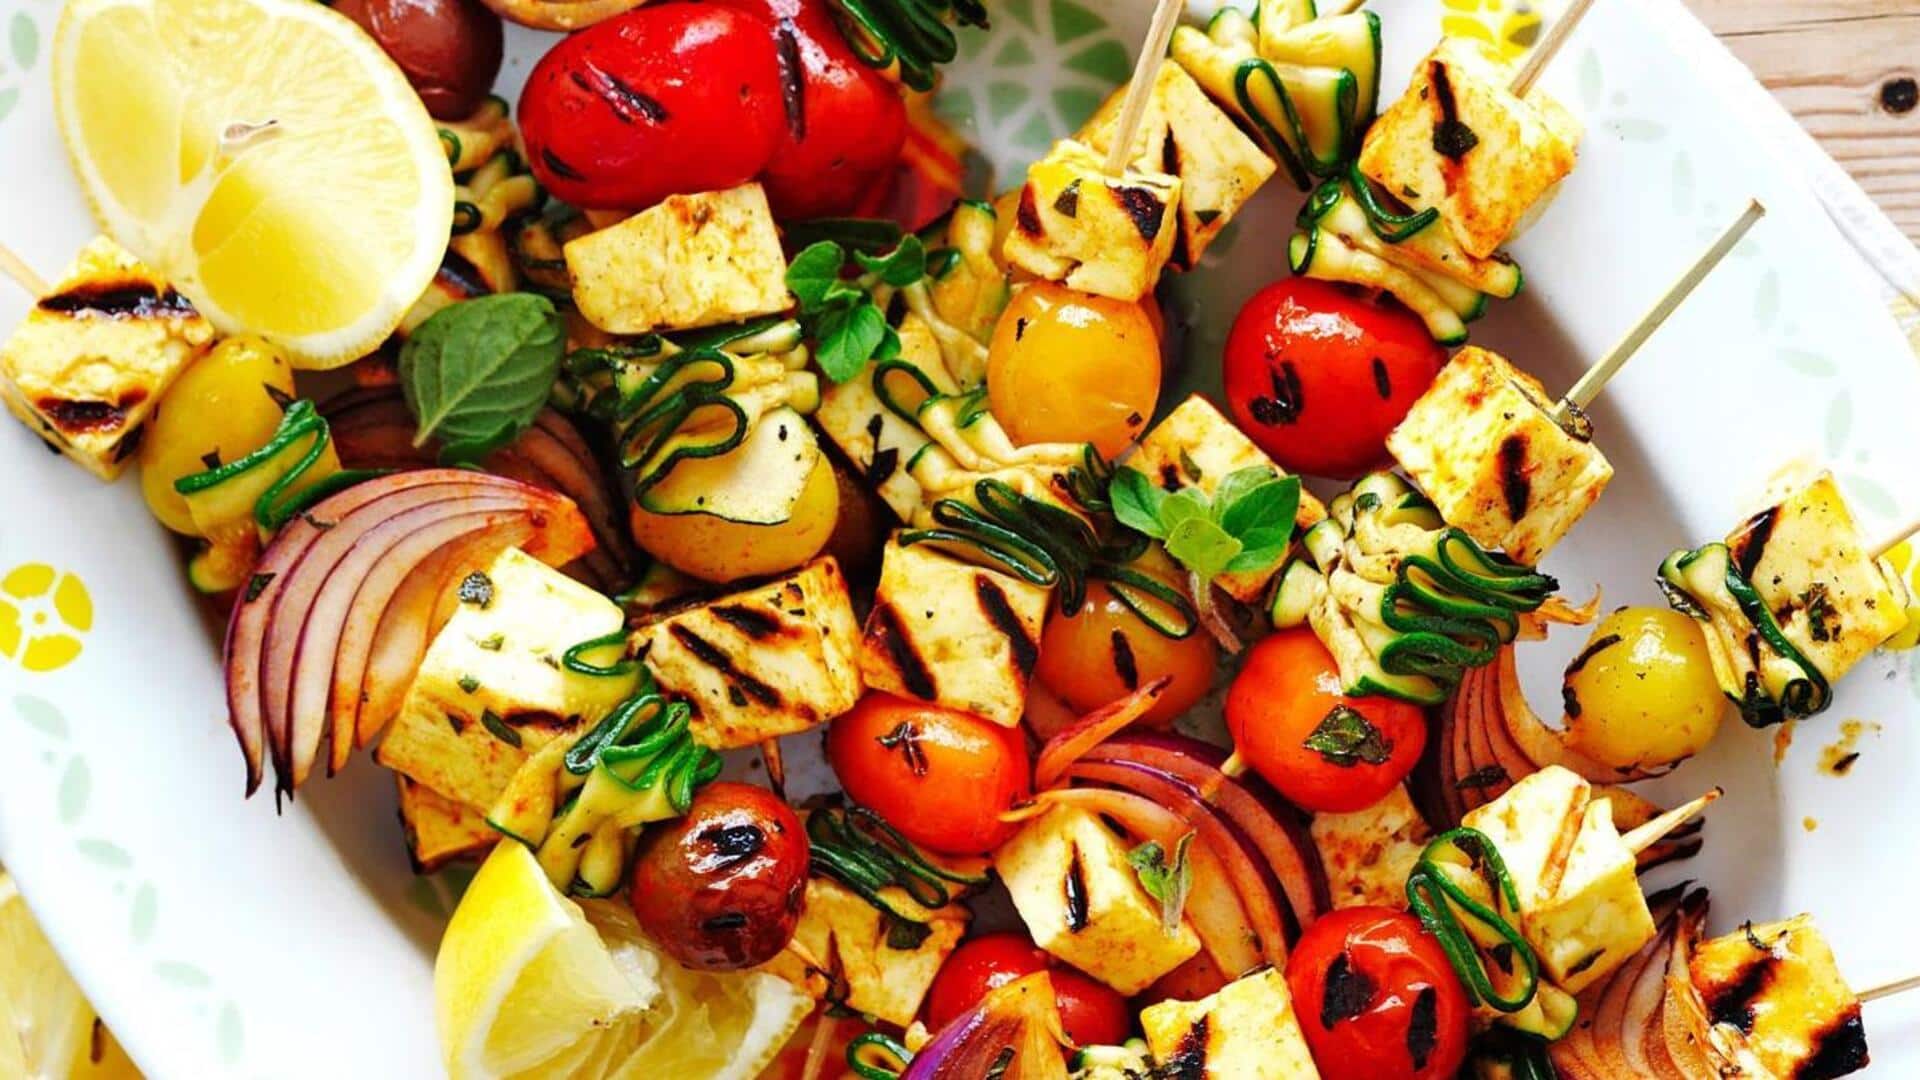 Try this savory grilled halloumi vegetable skewer recipe